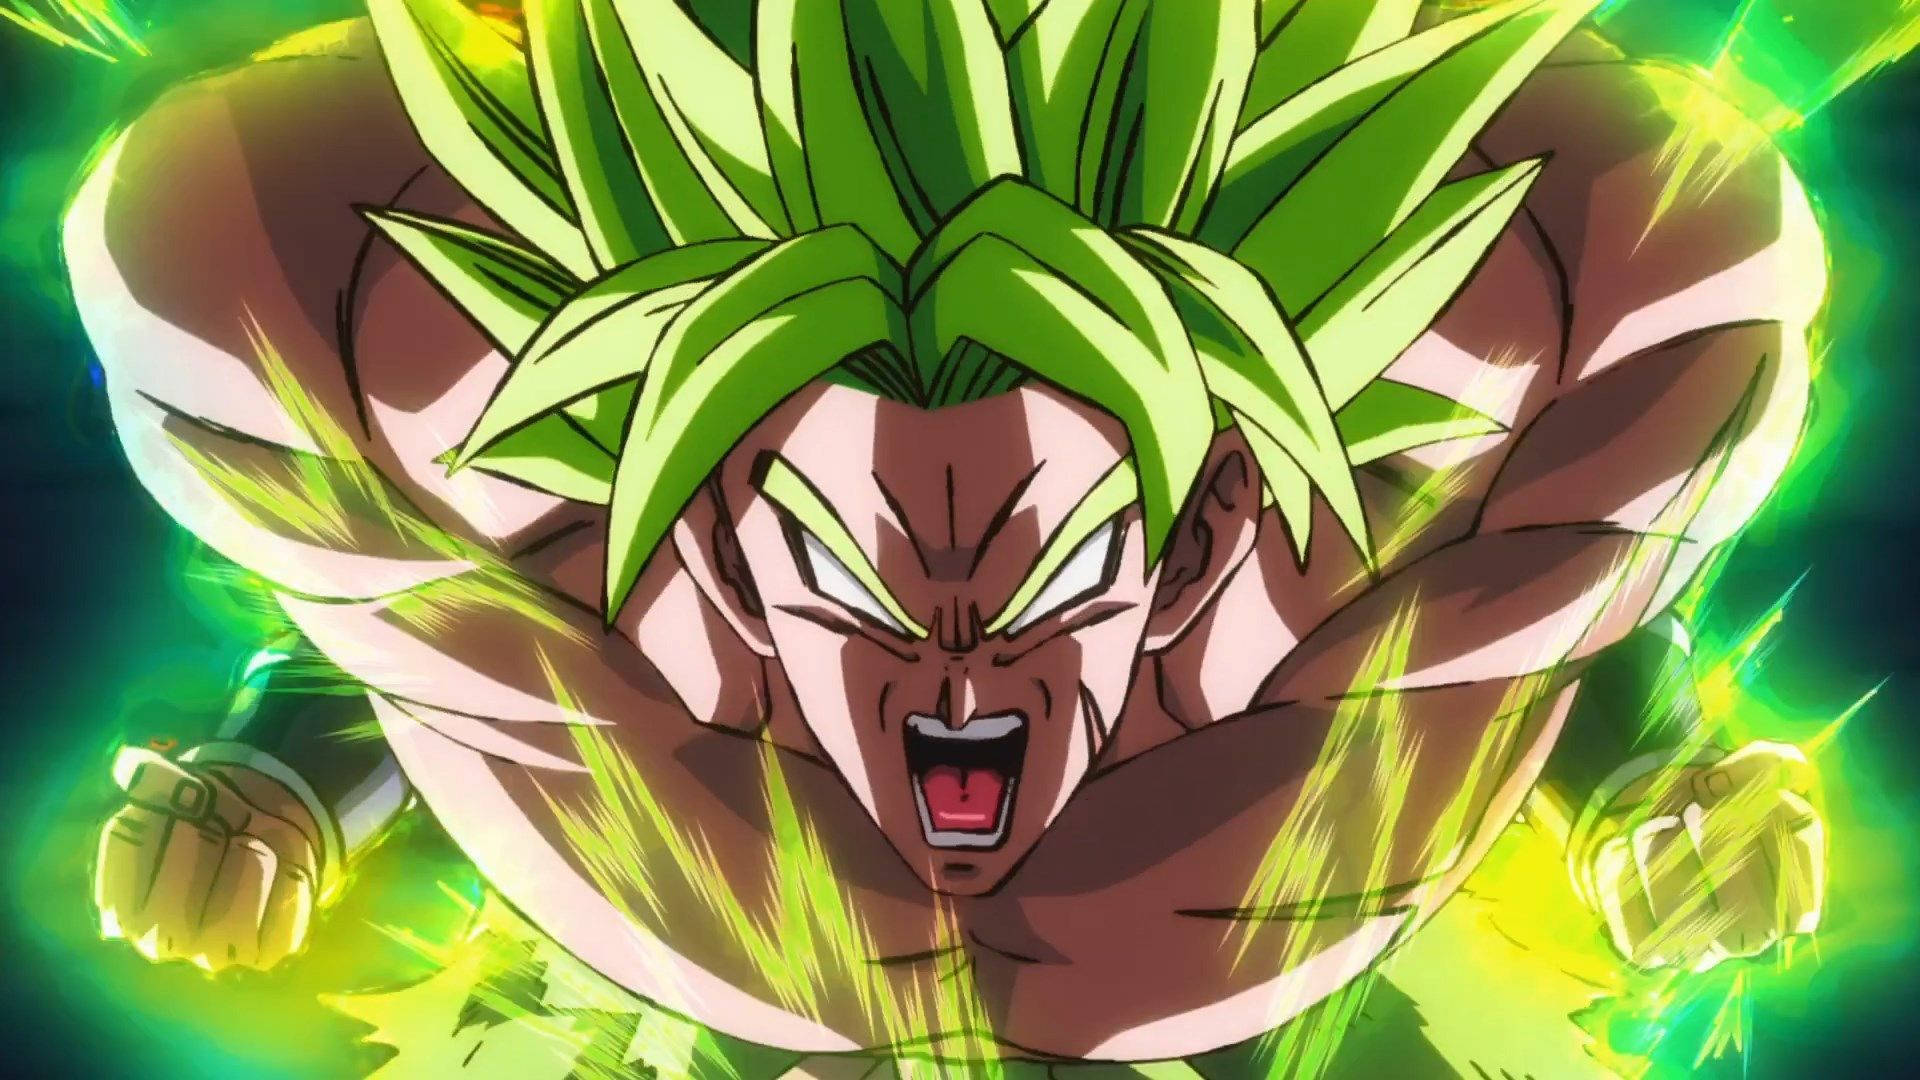 Fierce warrior, Broly, confronts an enemy in an epic combat. Wallpaper